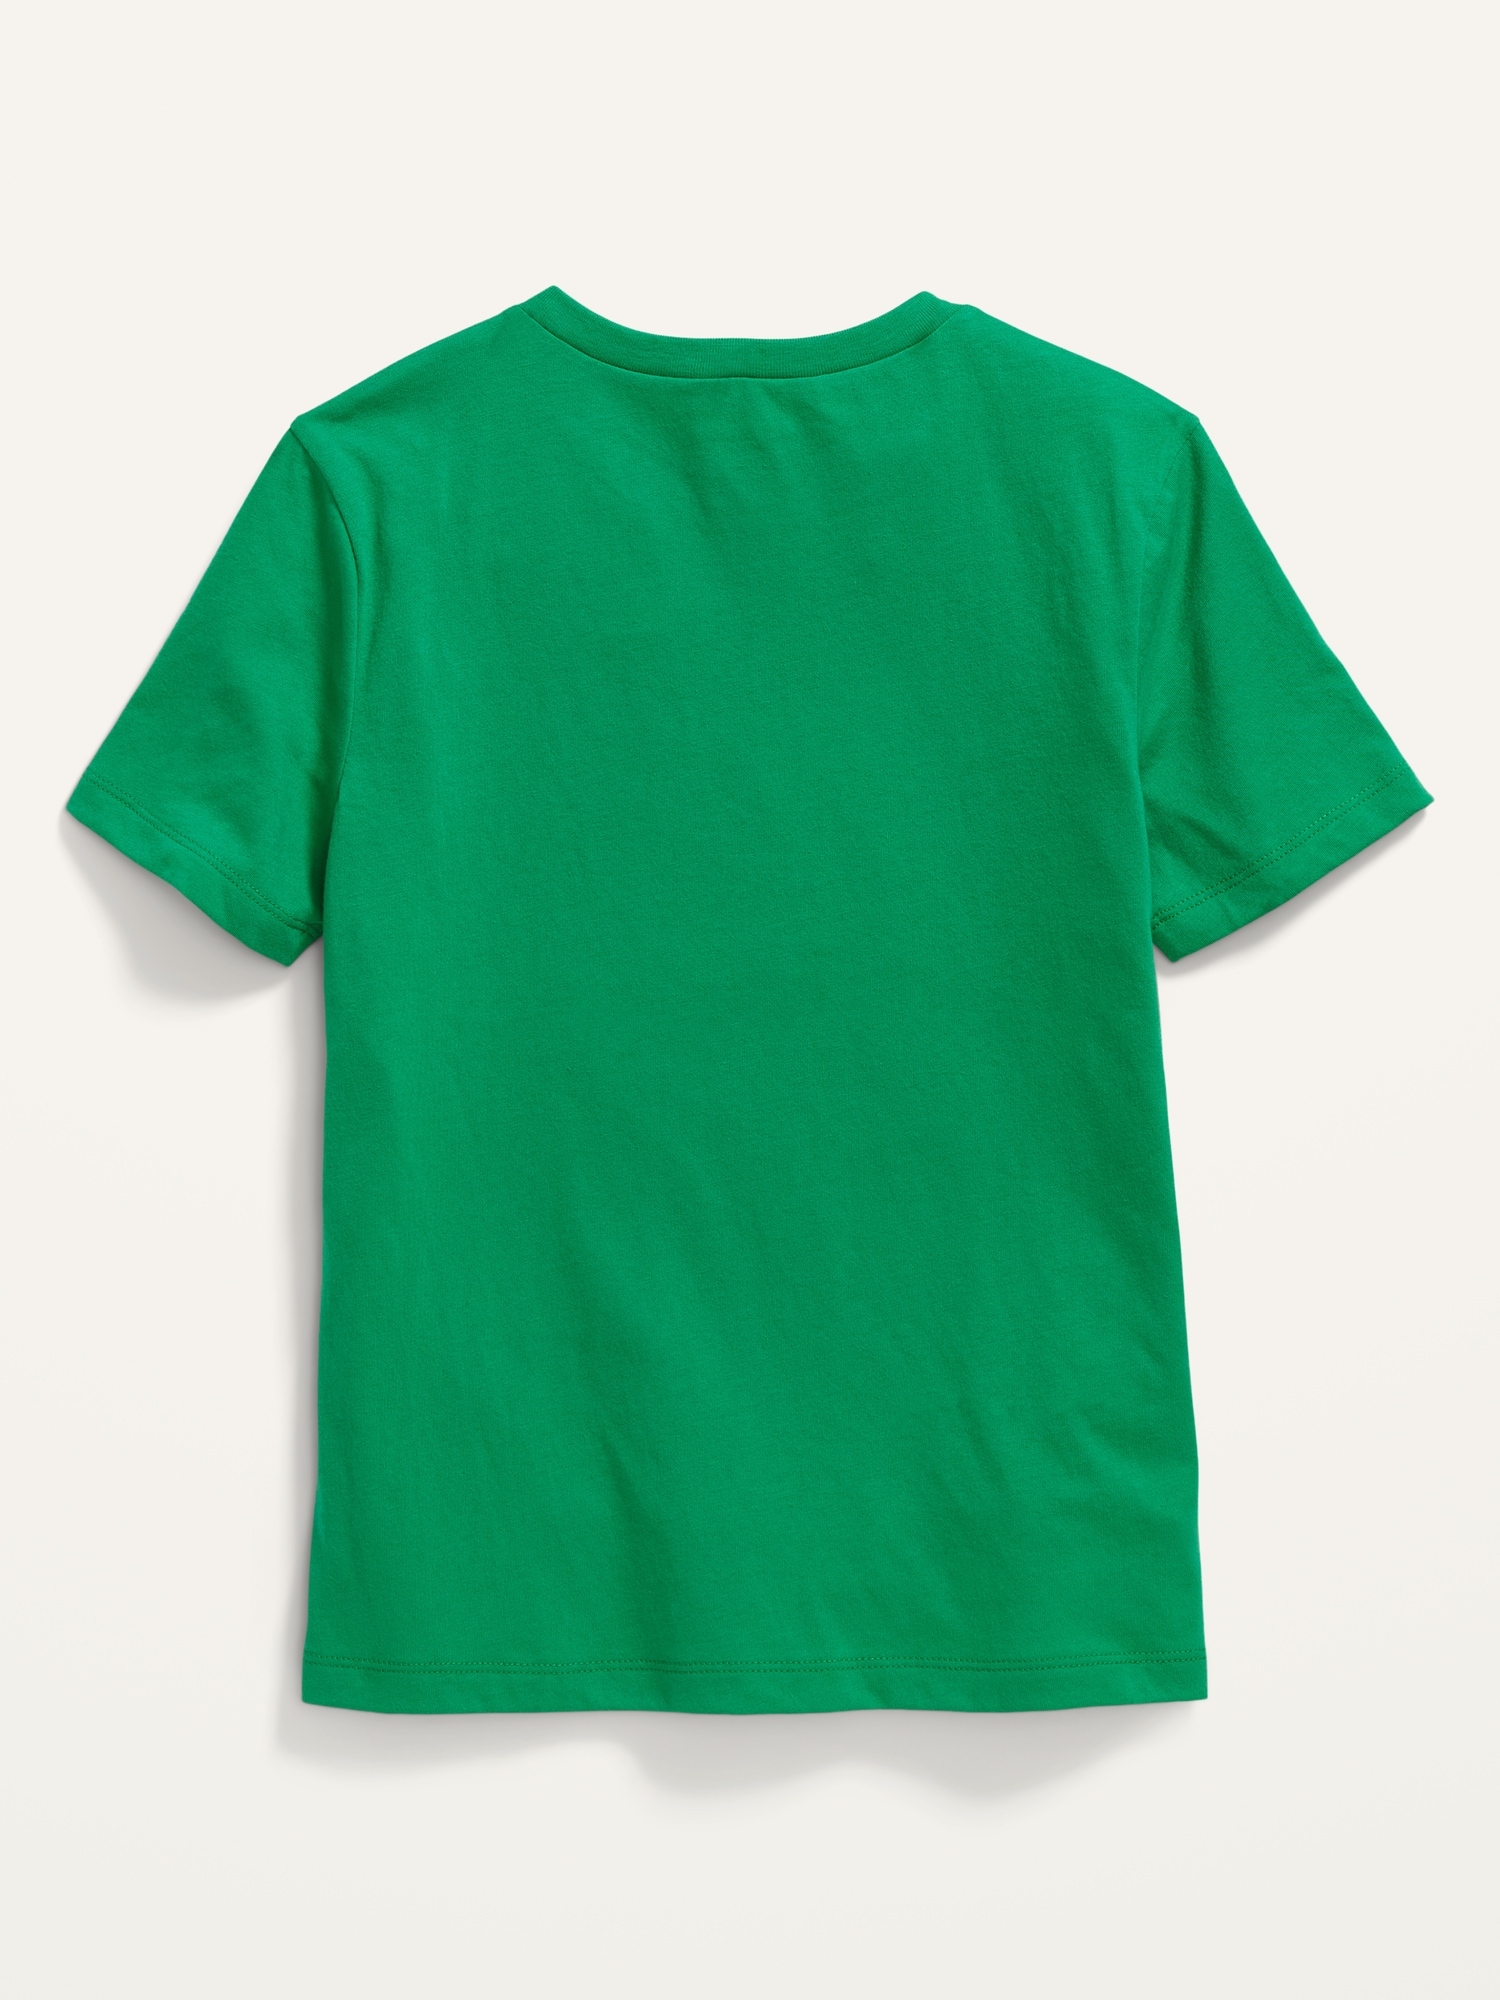 Matching St. Patrick's Day Graphic T-Shirt for Boys | Old Navy